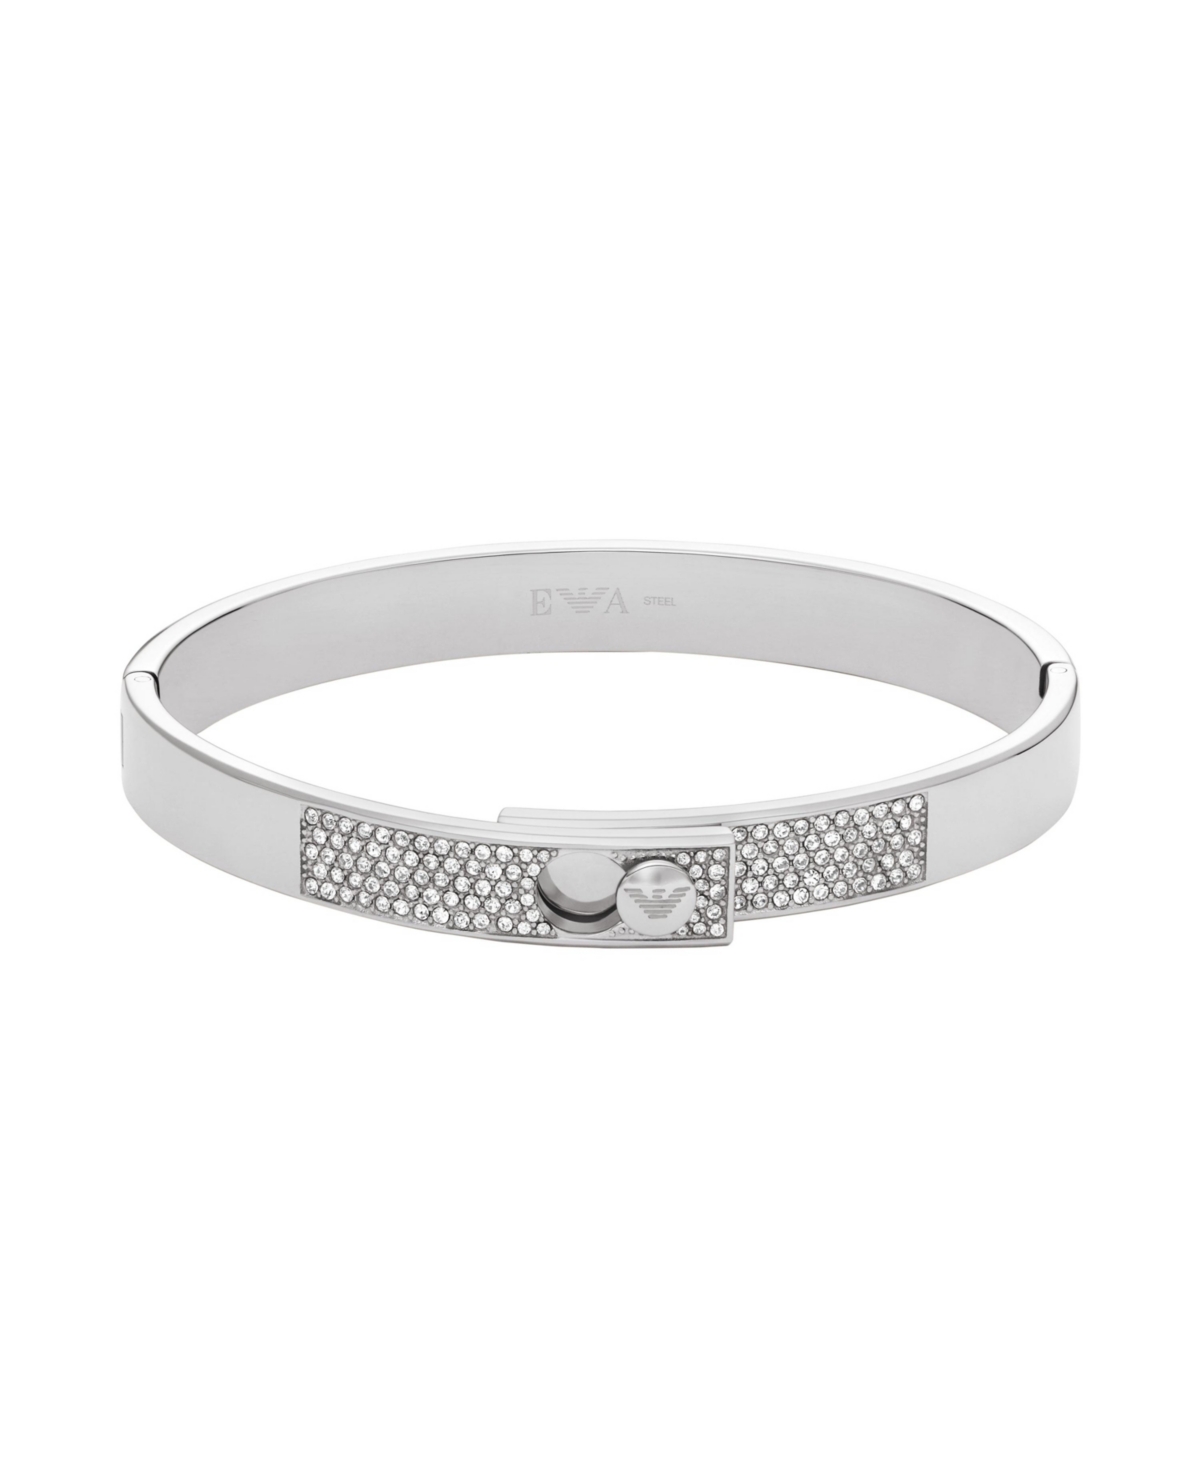 Women's Stainless Steel with Crystals Setted Bangle Bracelet, EGS3088040 - Silver